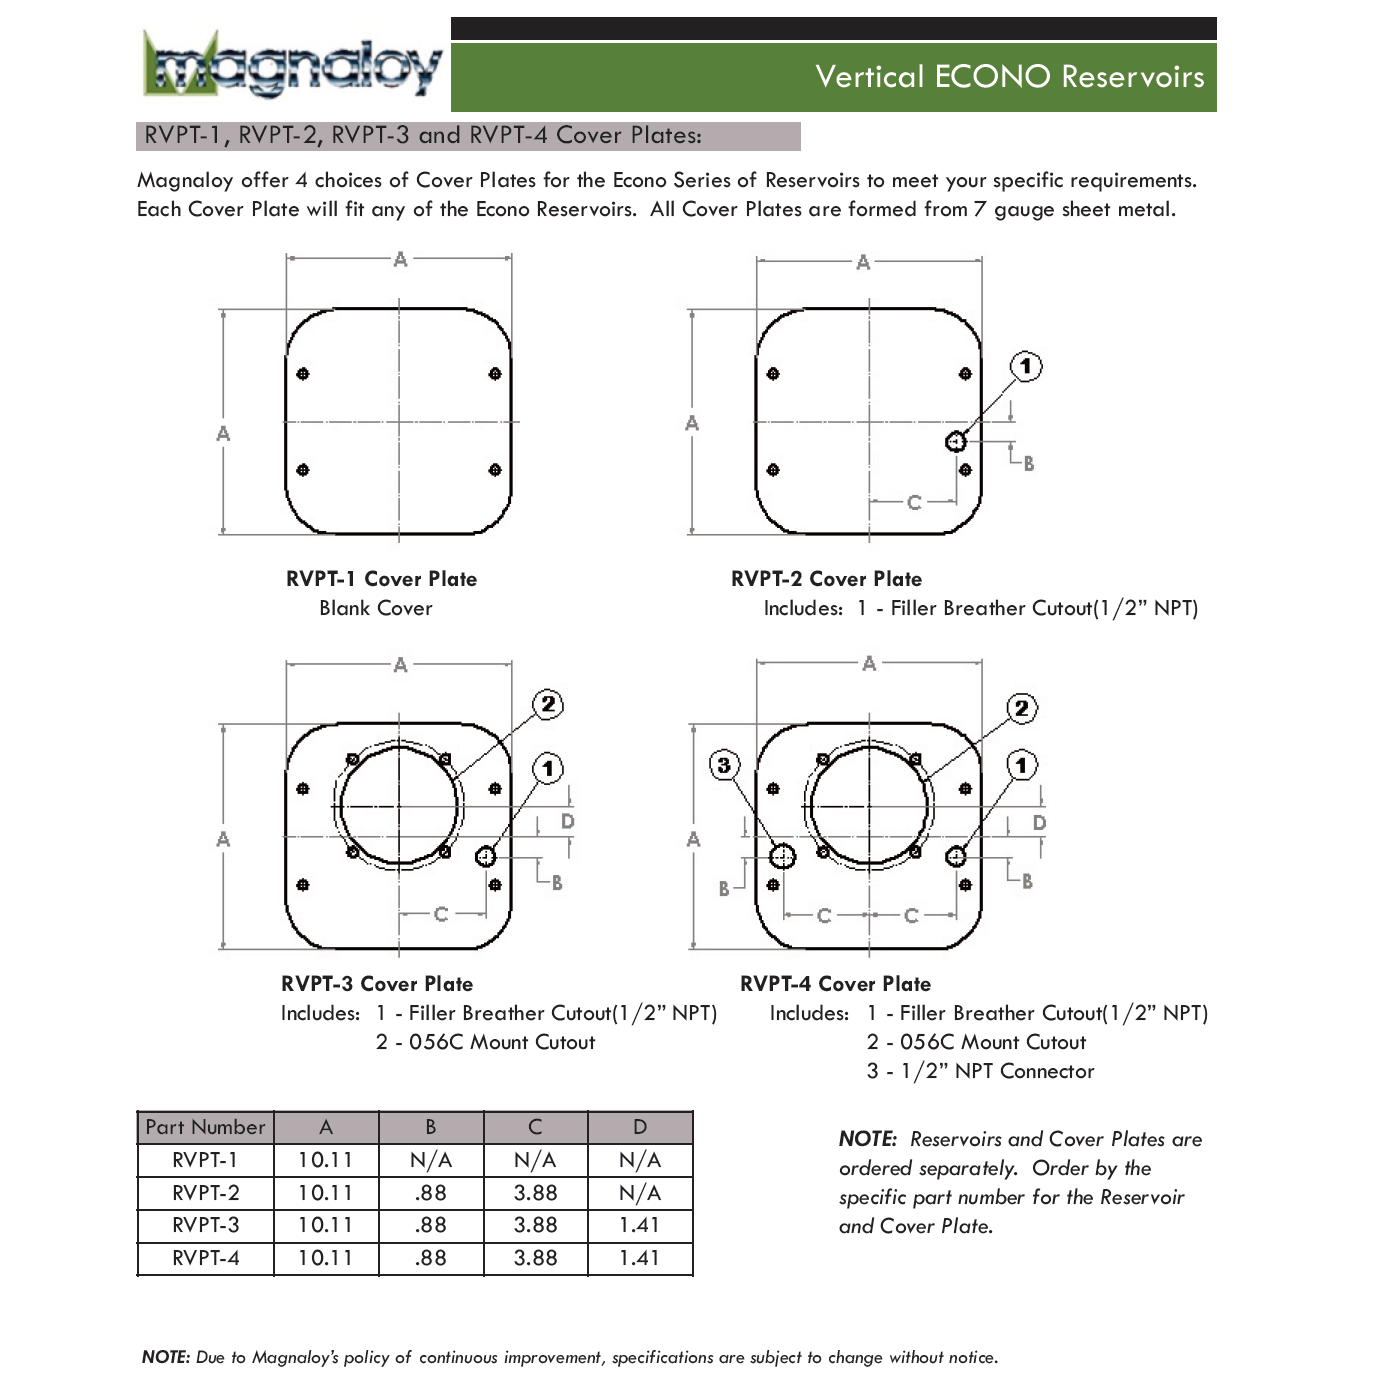 RVPT-4 : Magnaloy Reservoir Lid Cover Plate, Vertical Econo Series, 7GA, with Filler Breather & 56C Motor & 1/2" NPT Cutout